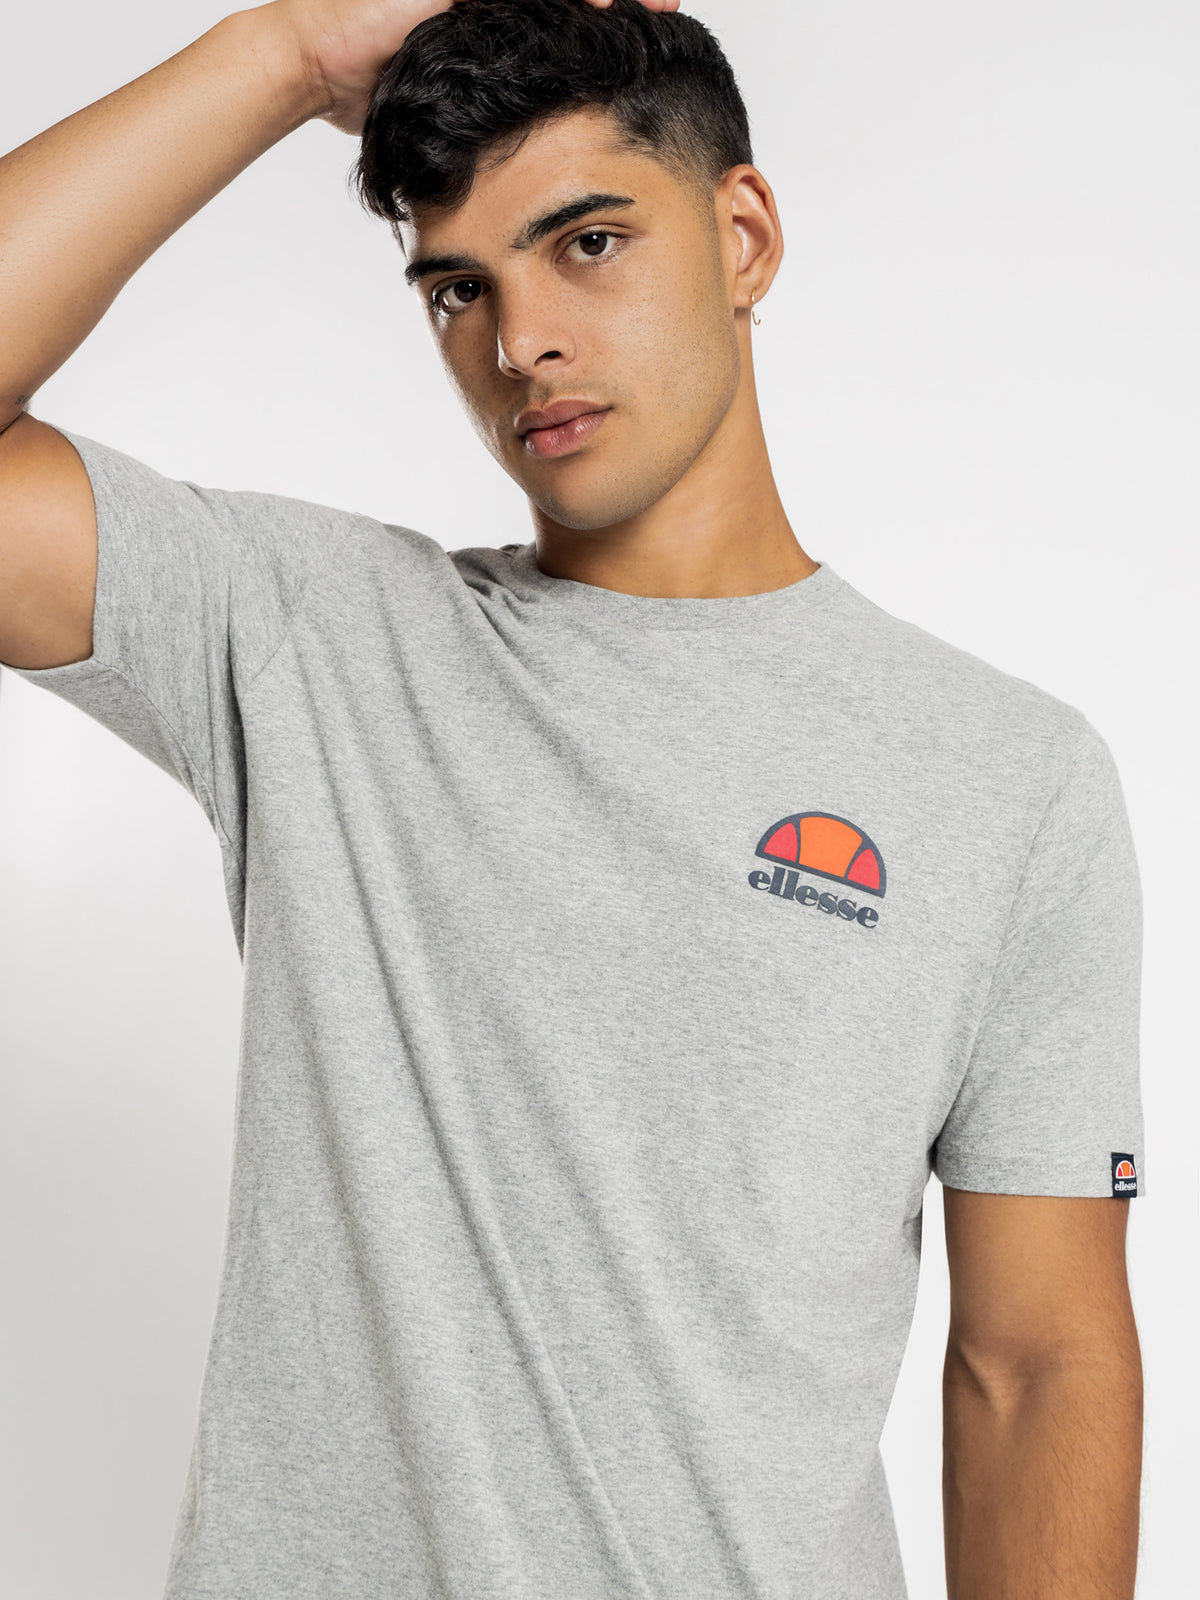 Canaletto T-Shirt in Grey Marl